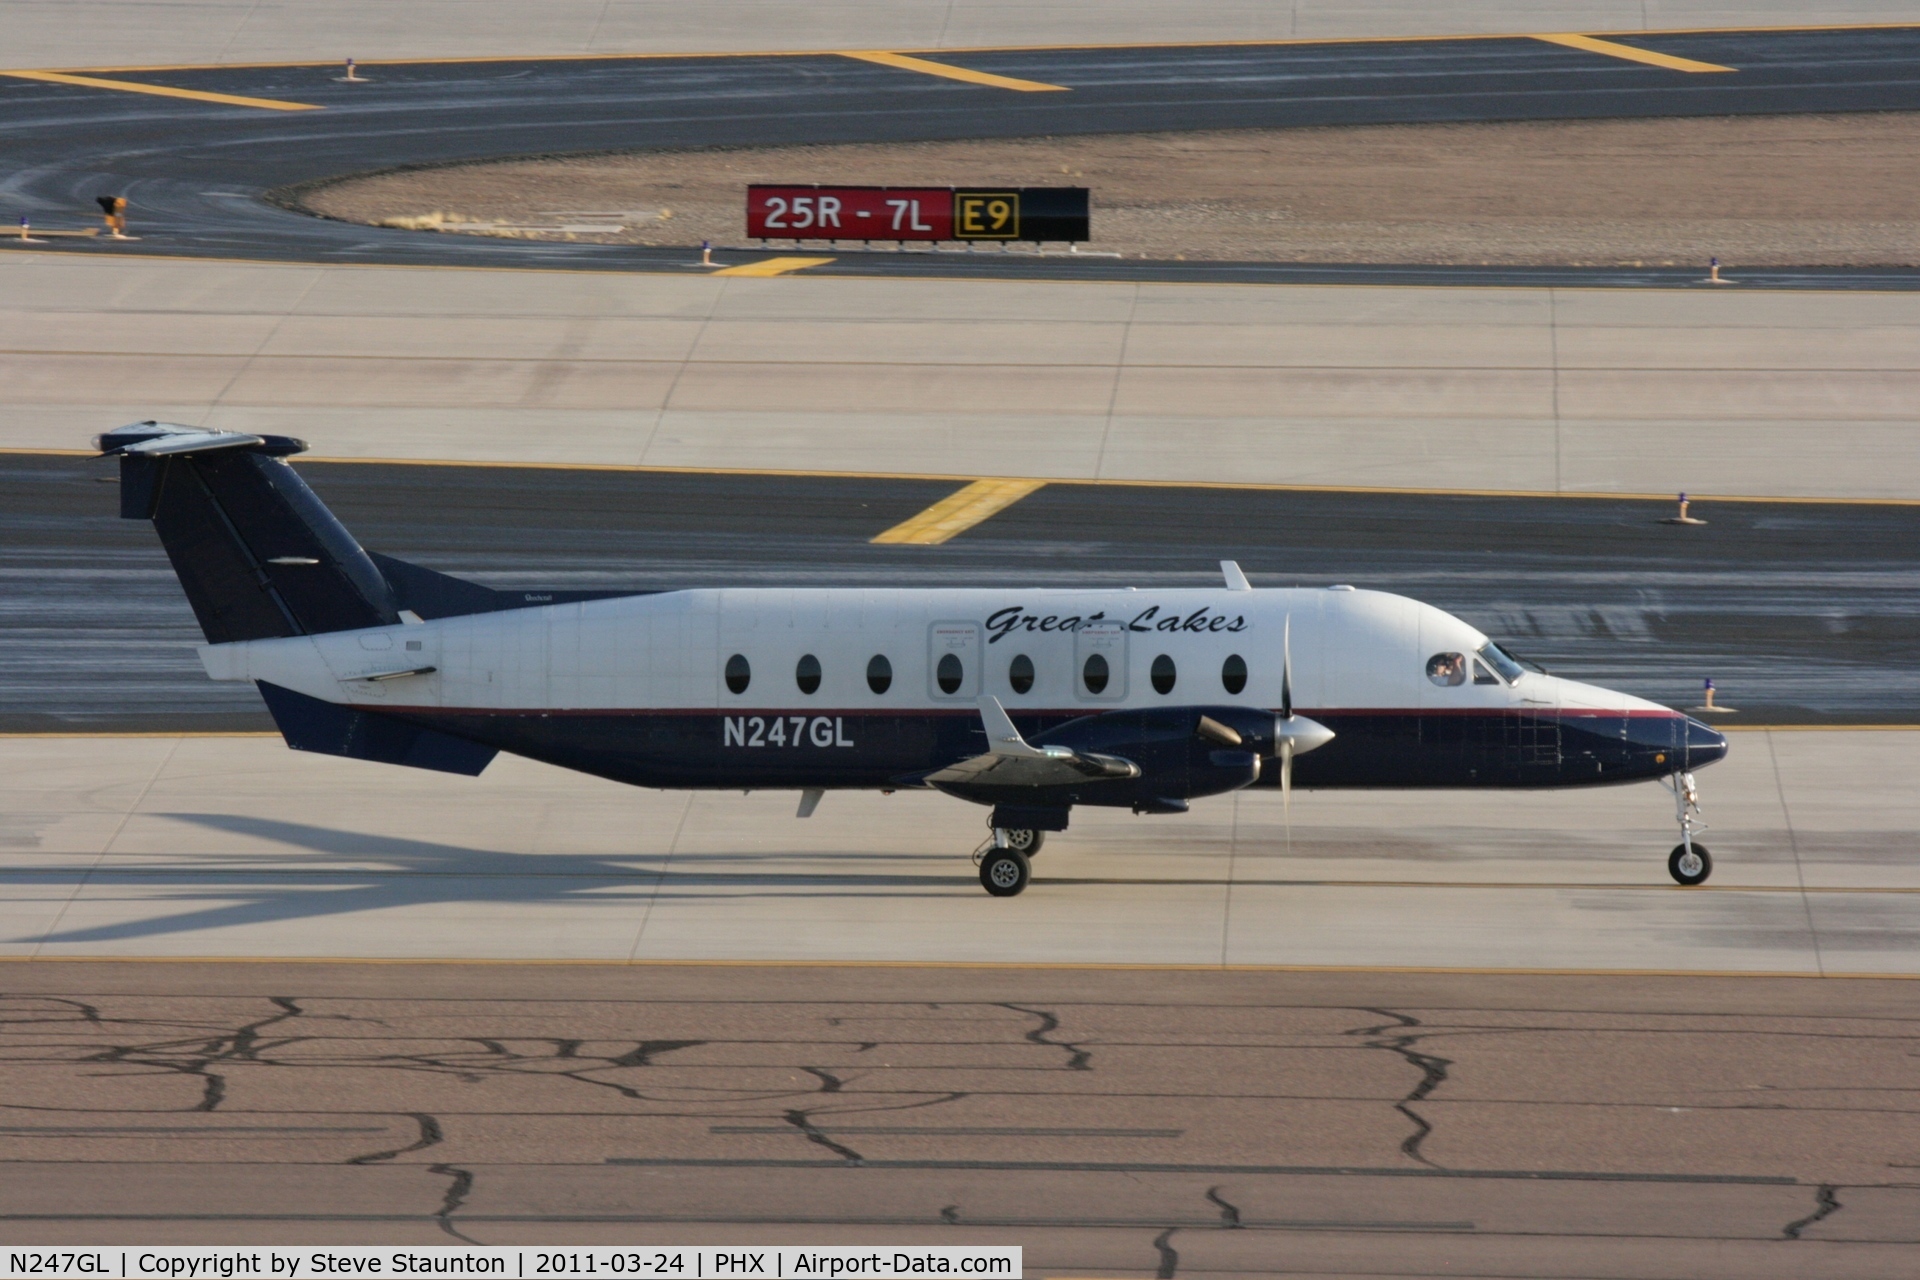 N247GL, 1996 Beech 1900D C/N UE-247, Taken at Phoenix Sky Harbor Airport, in March 2011 whilst on an Aeroprint Aviation tour